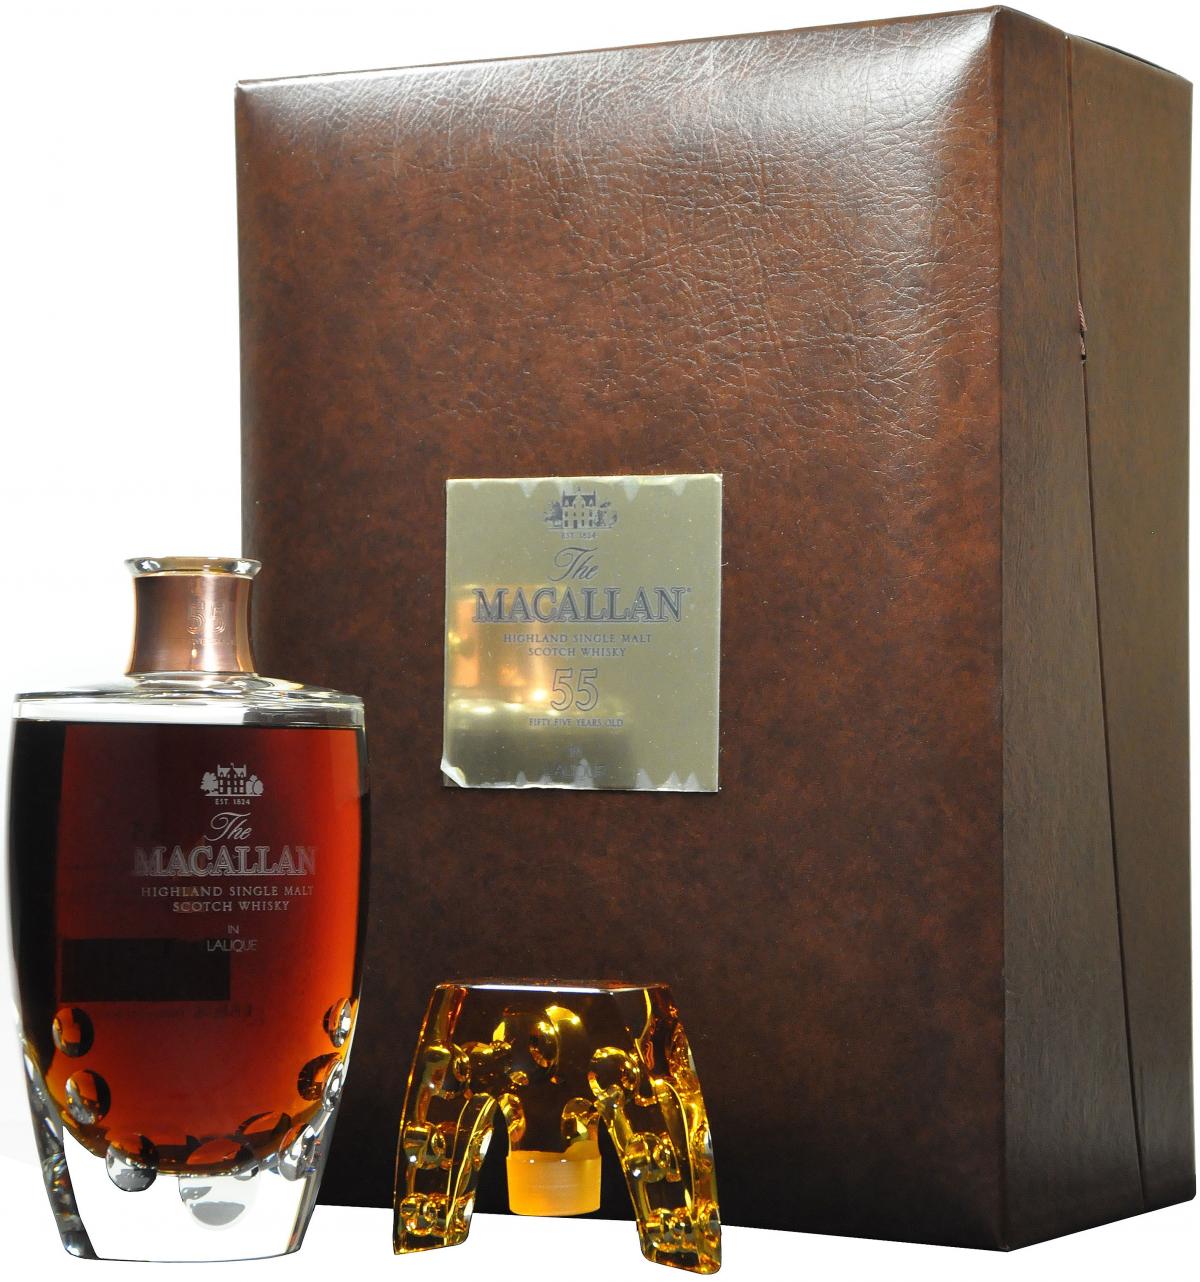 macallan 55 year old lalique decanter, first release, speyside single malt scotch whisky